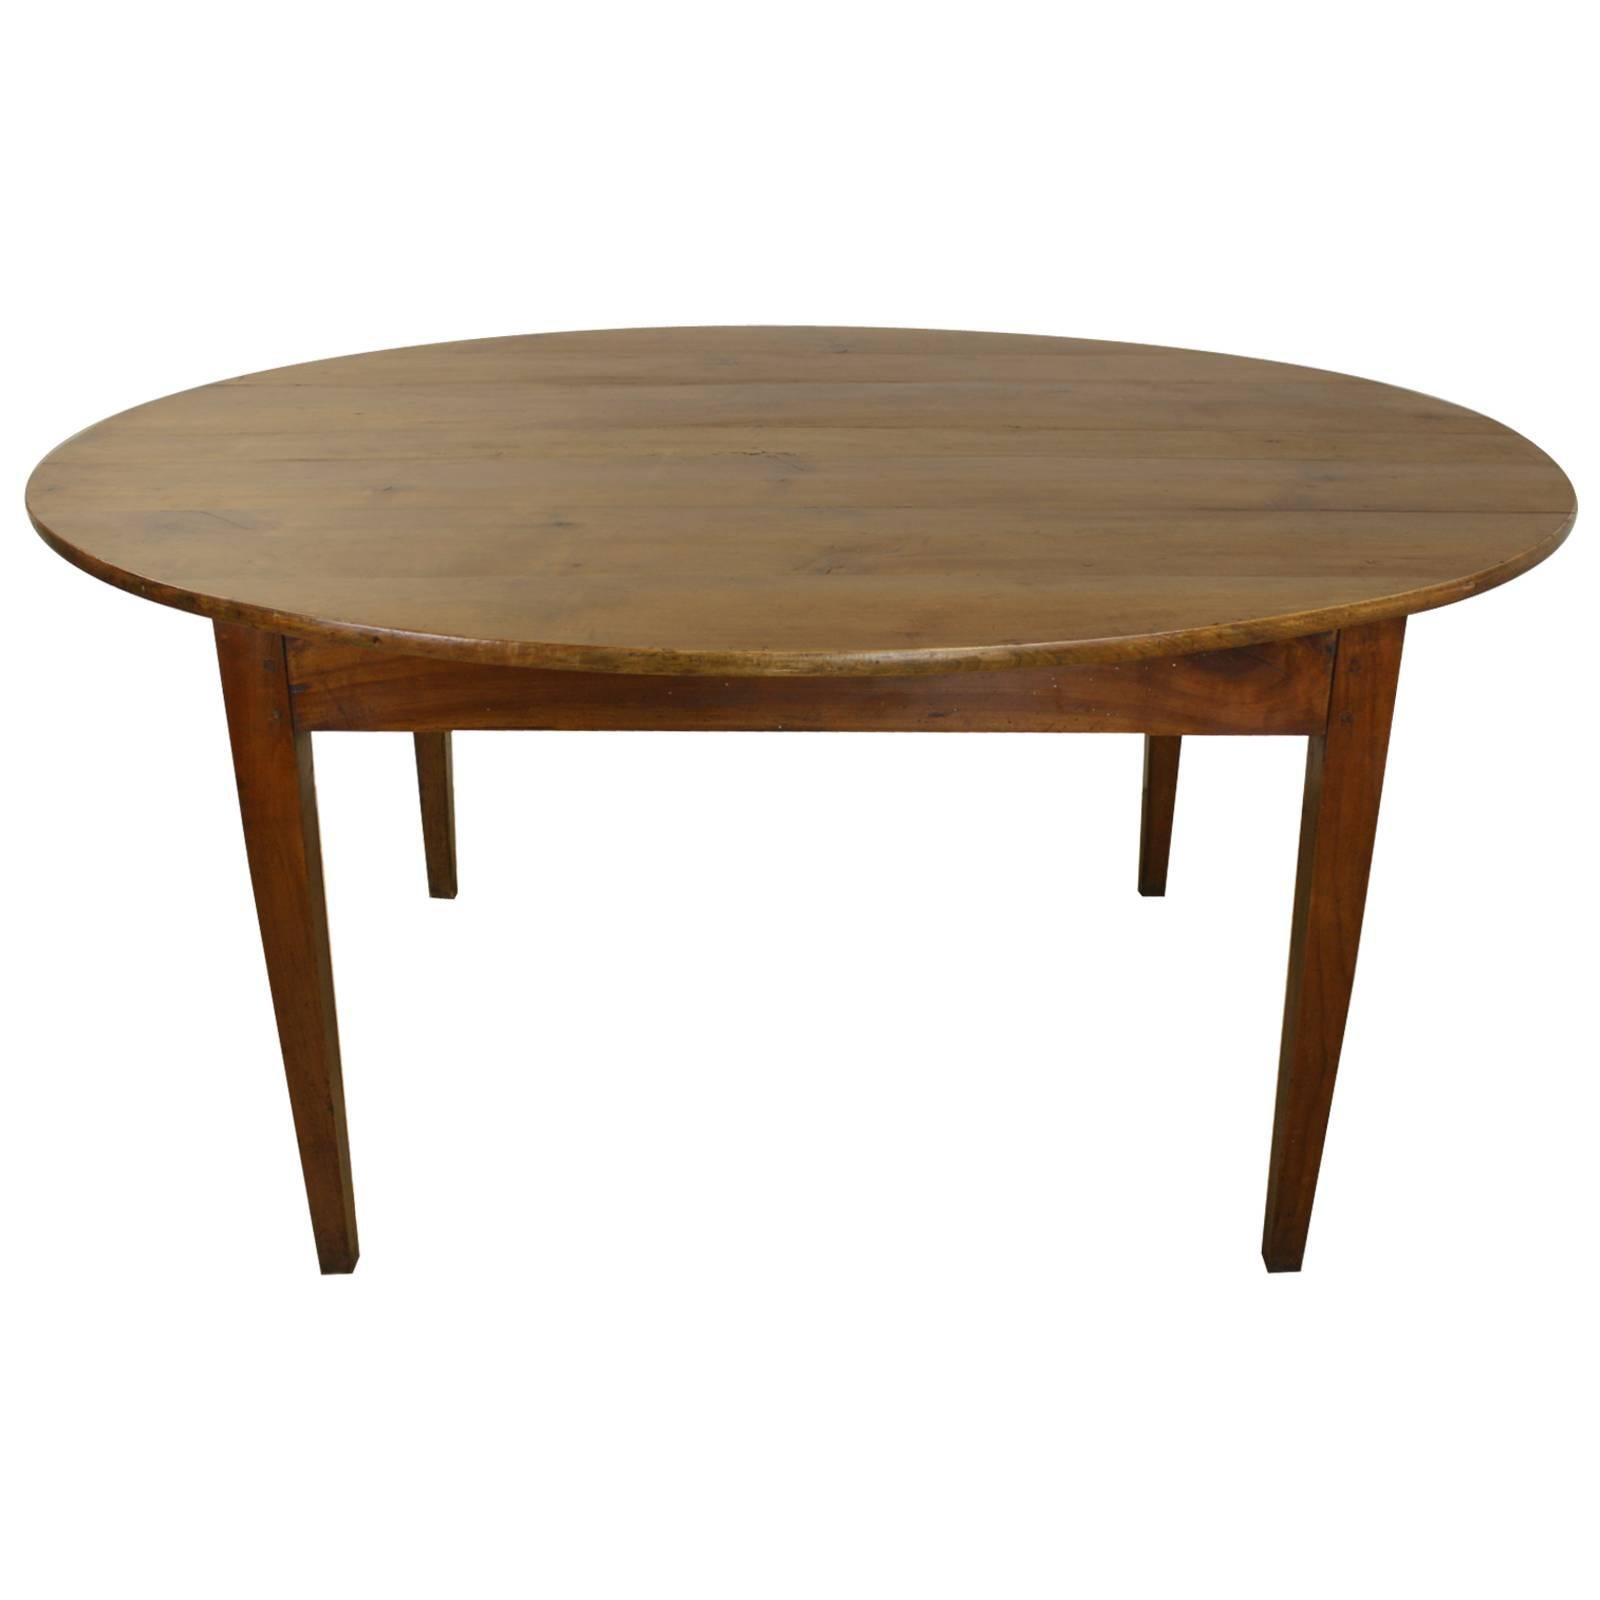 Antique French Oval Cherry Dining Table